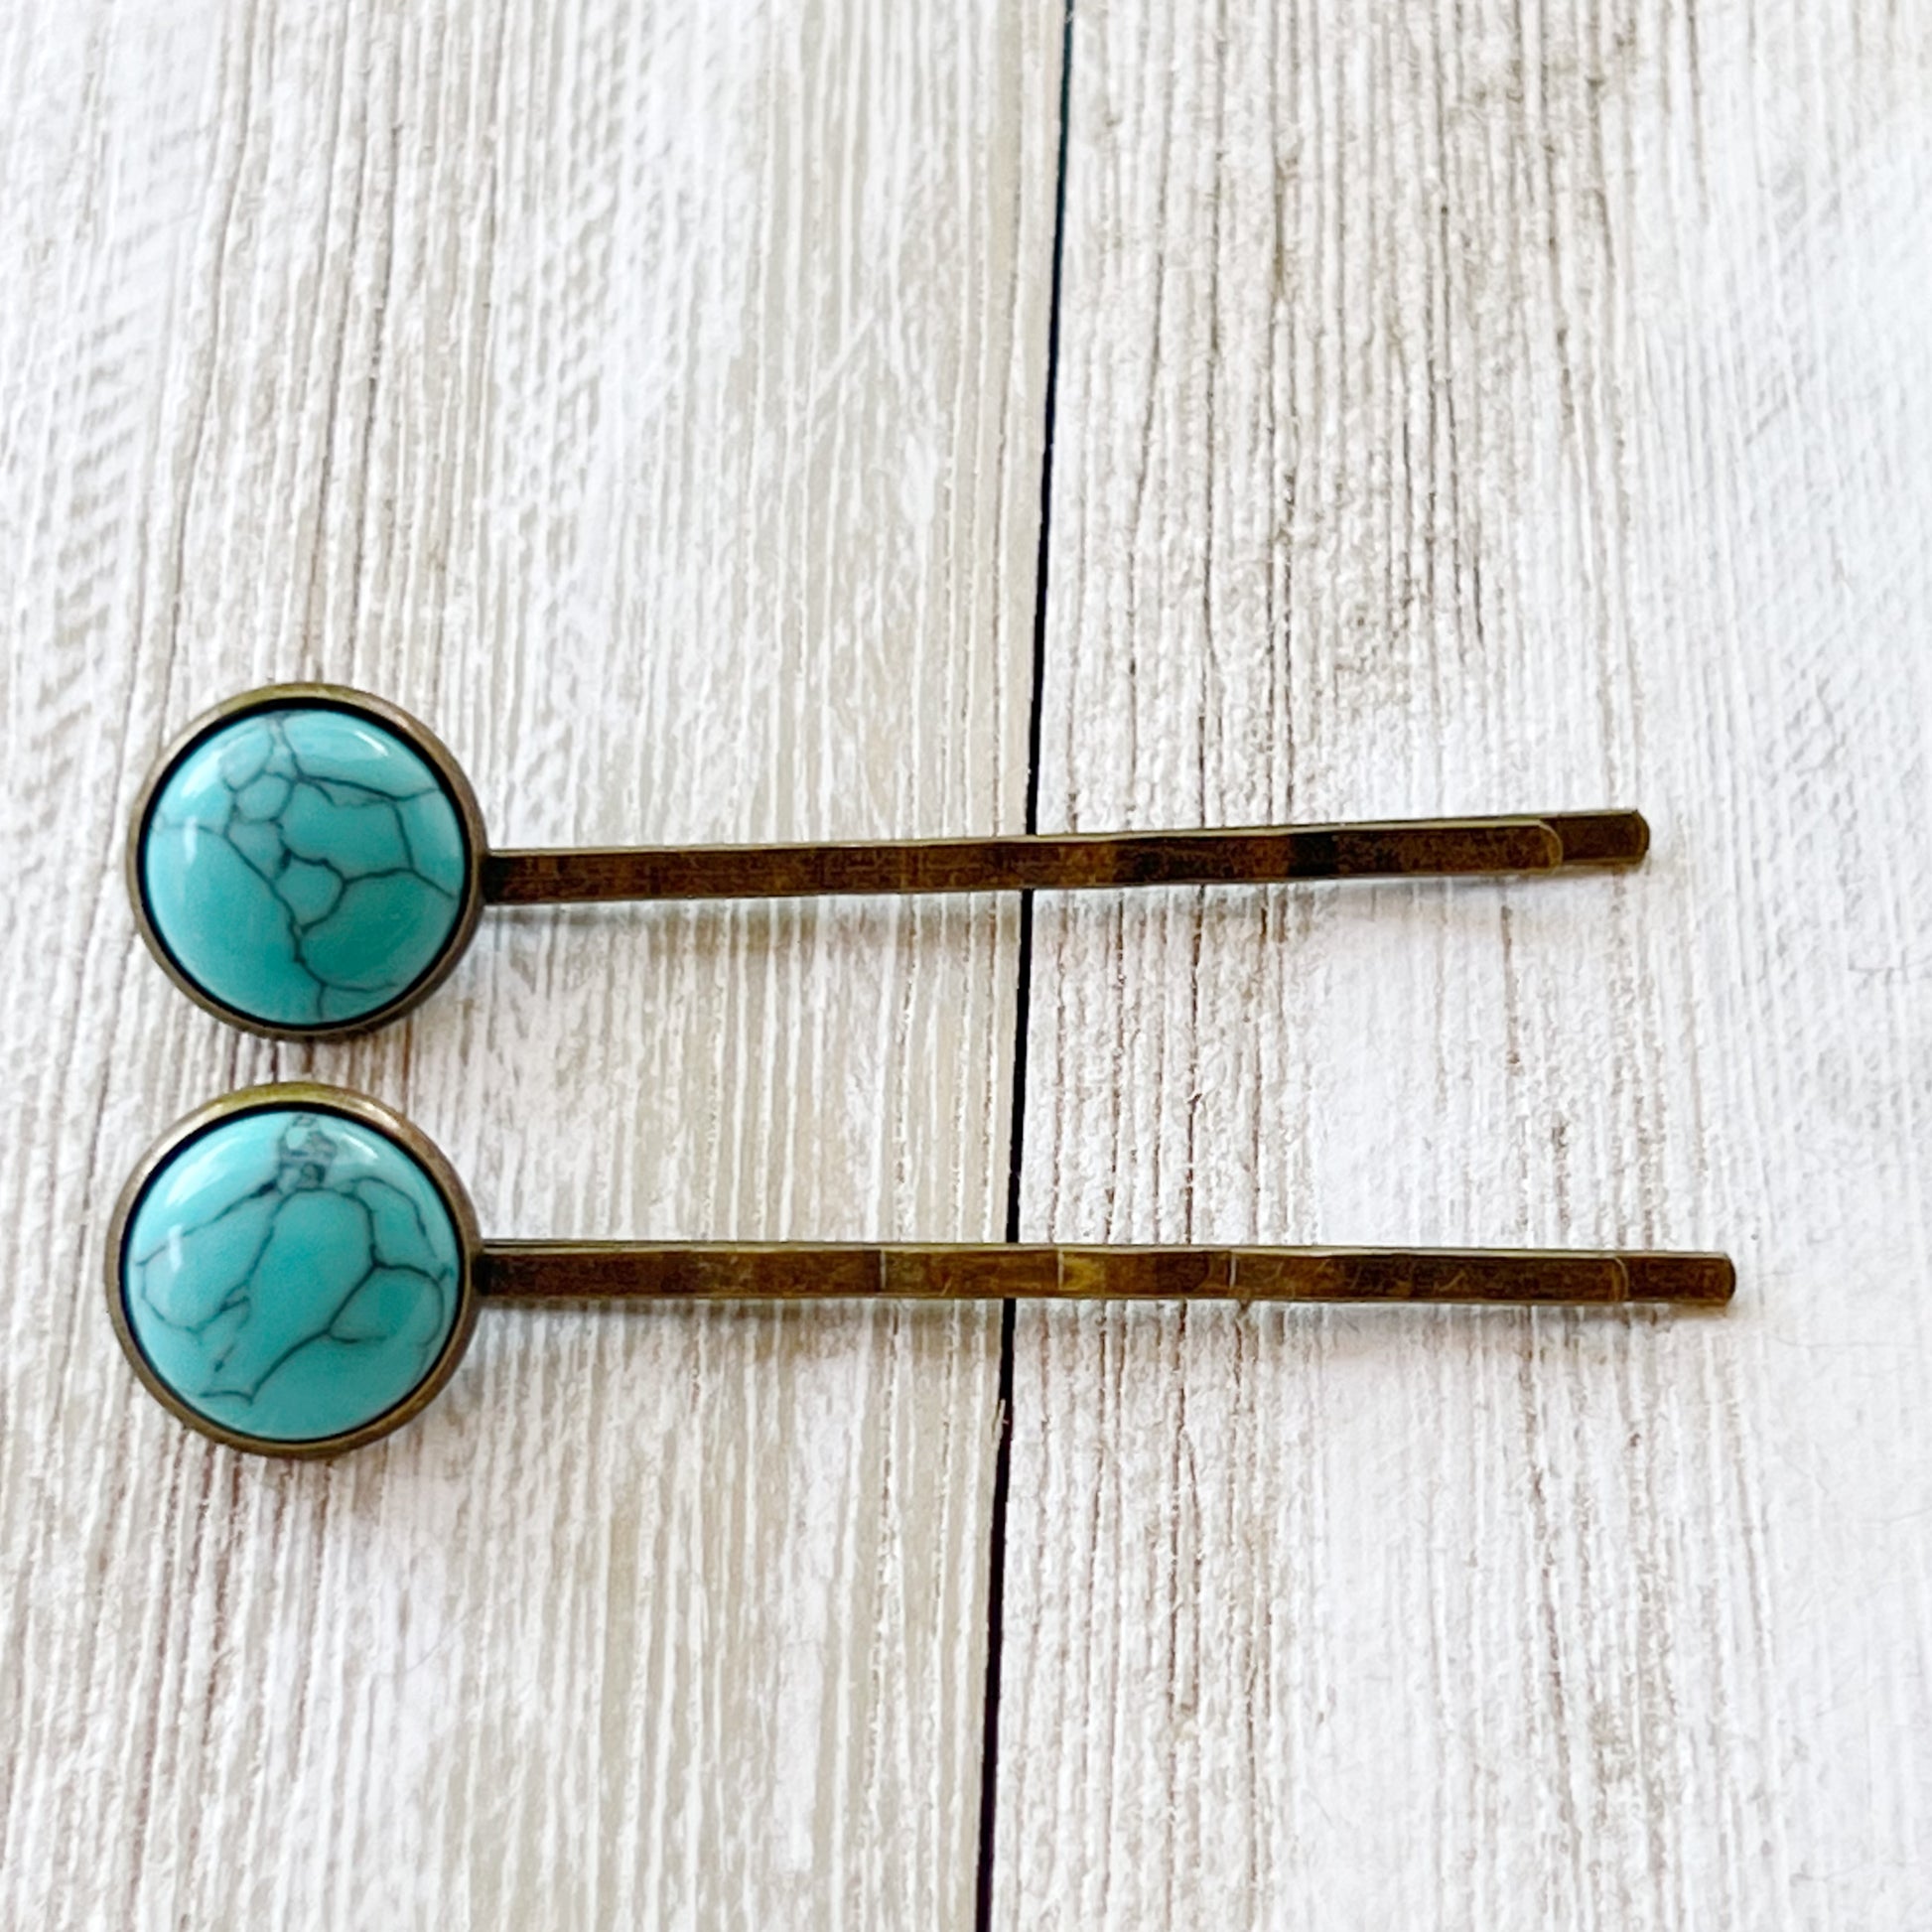 Turquoise Hair Pins - Western Cowgirl Decorative Brass Bobby Pin, Women's Southwestern Hair Accessories